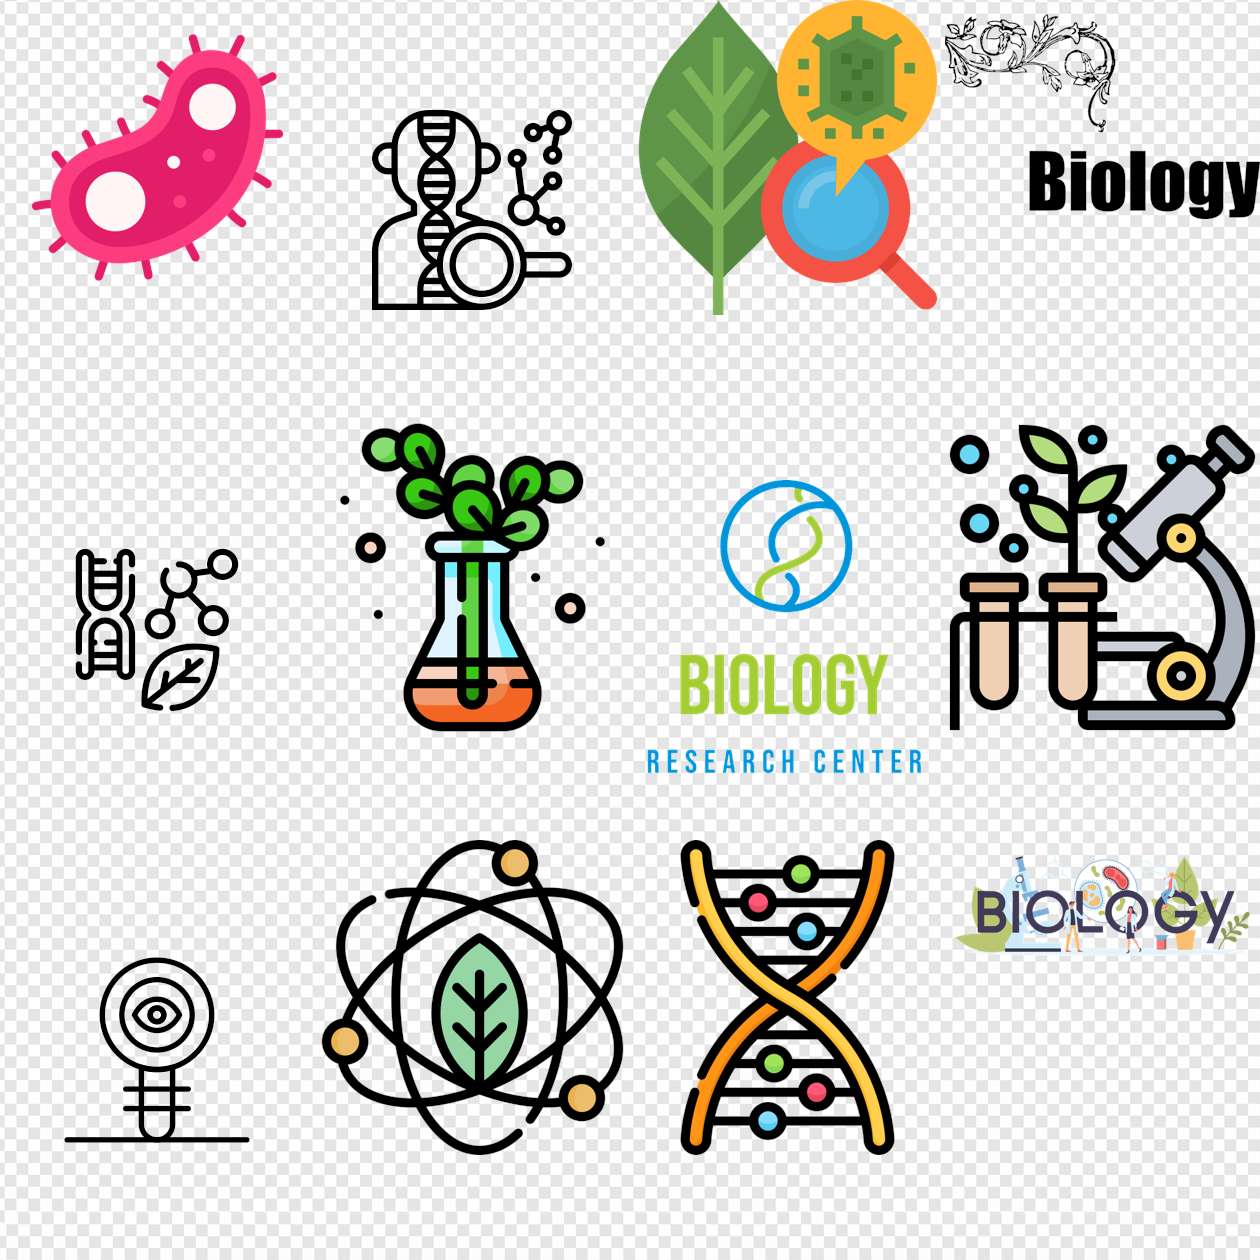 Biology Icon PNG Images, Vectors Free Download - Pngtree